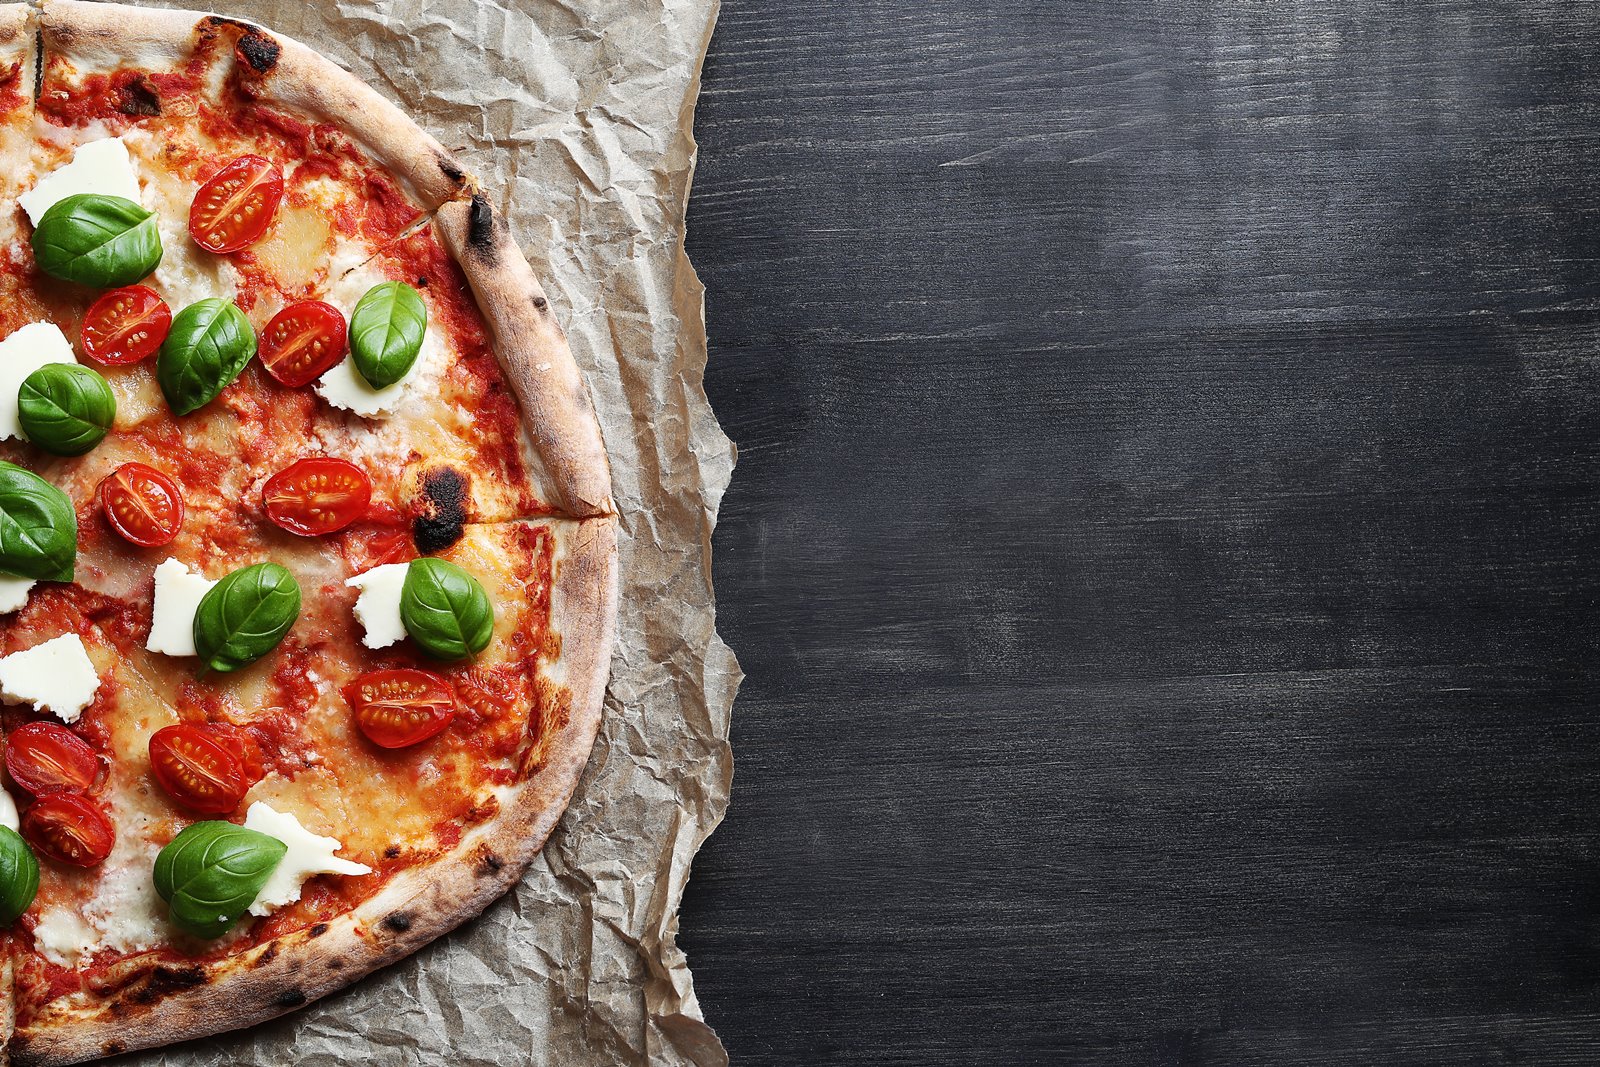 How to Make Pizza Healthy and Delicious